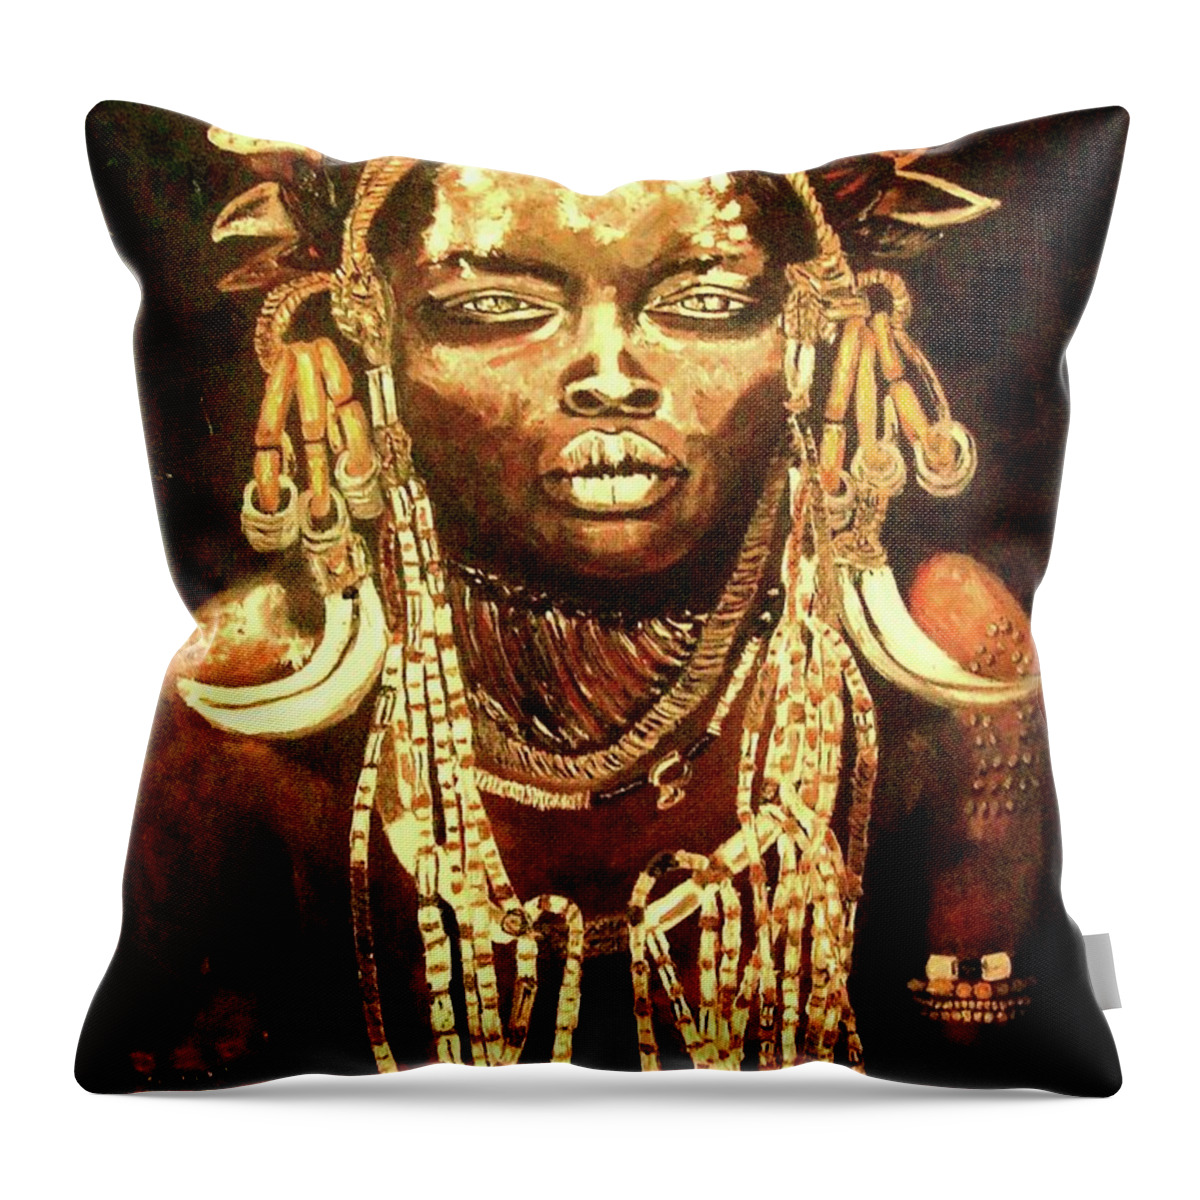 Africa Throw Pillow featuring the painting African Beauty by Kowie Theron